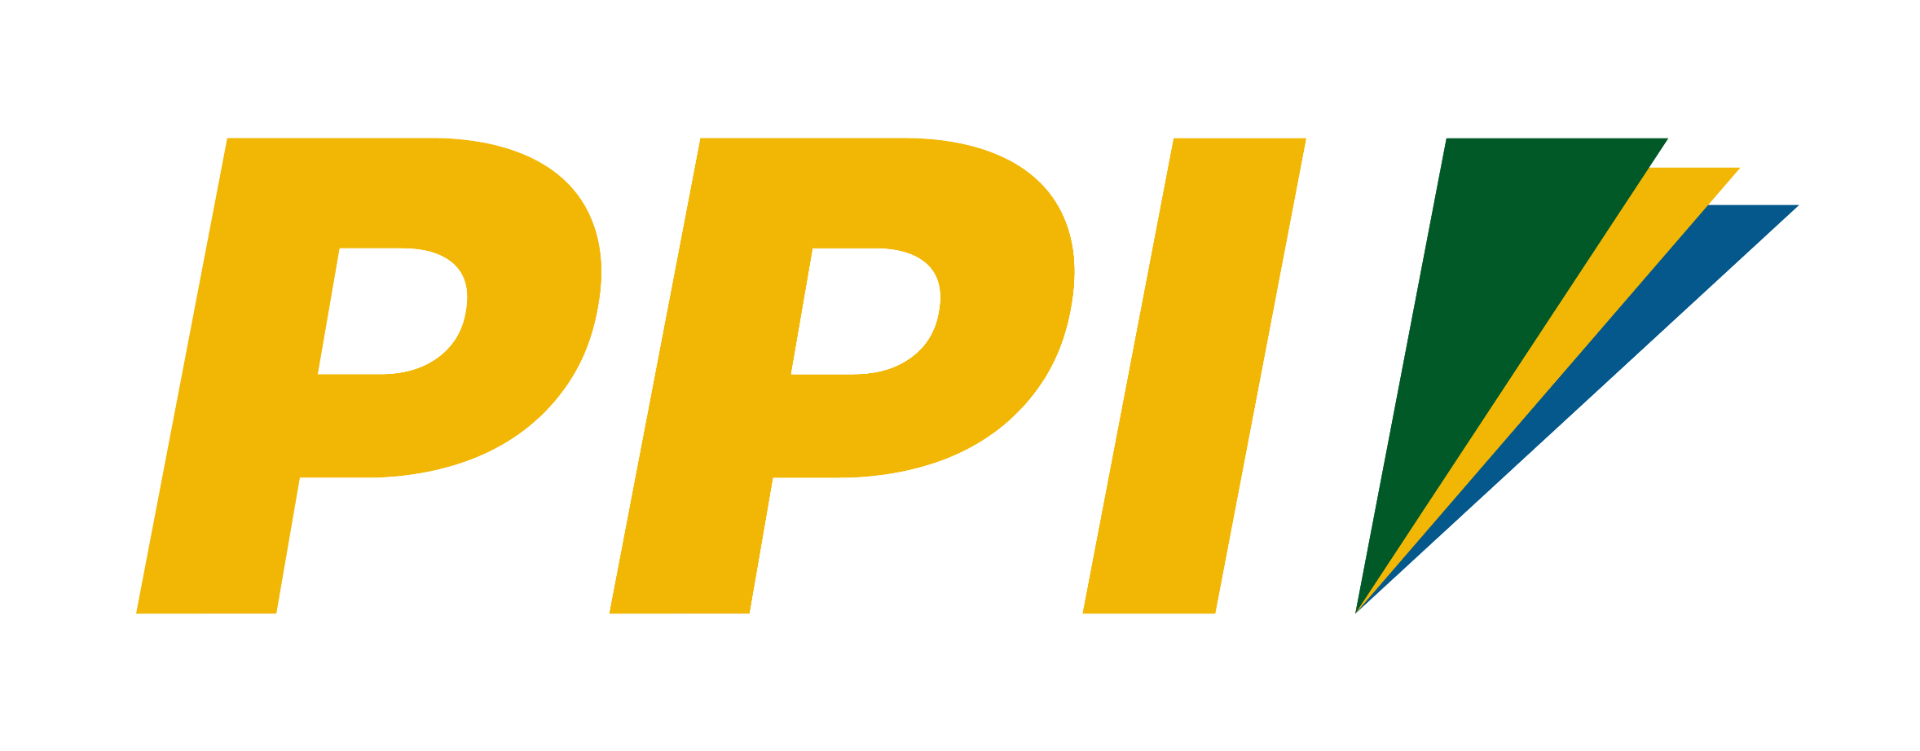 PPI (Simples) (B)